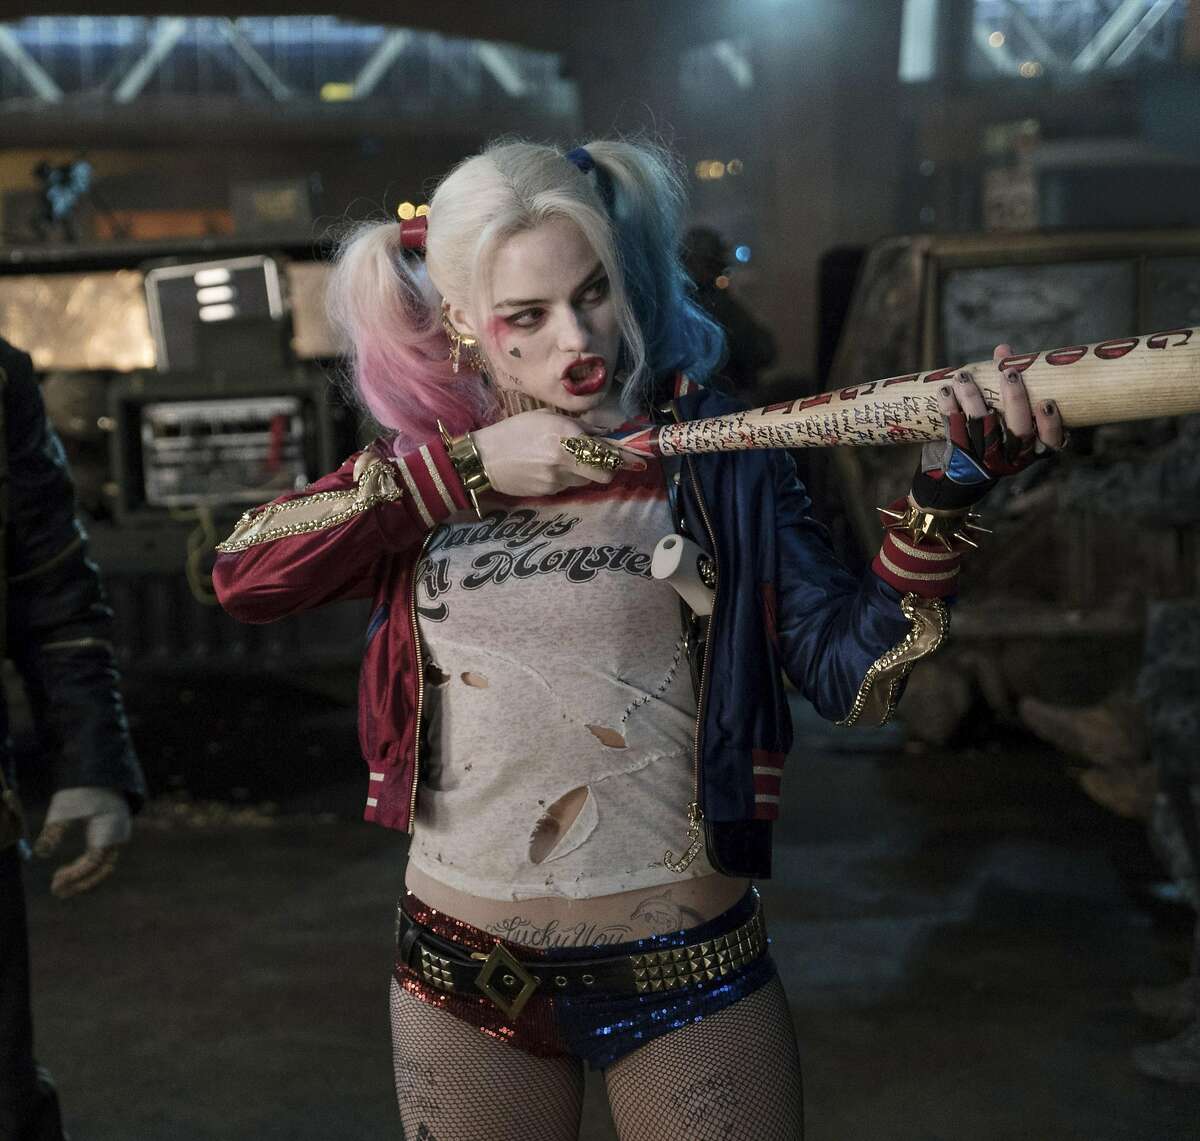 -- PHOTO MOVED IN ADVANCE AND NOT FOR USE - ONLINE OR IN PRINT - BEFORE AUG. 7, 2016. -- In an undated handout photo, Margot Robbie as Harley Quinn in the film "Suicide Squad." This year, the Harley Quinn character headlines three books, including a self-titled monthly comic, two six-issue mini-series and the new Warner Bros. film "Suicide Squad." (Clay Enos/Warner Bros. and DC Comics via The New York Times) -- NO SALES; FOR EDITORIAL USE ONLY WITH HARLEY QUINN ADV07 BY ROBERT ITO FOR AUG. 7, 2016. ALL OTHER USE PROHIBITED.